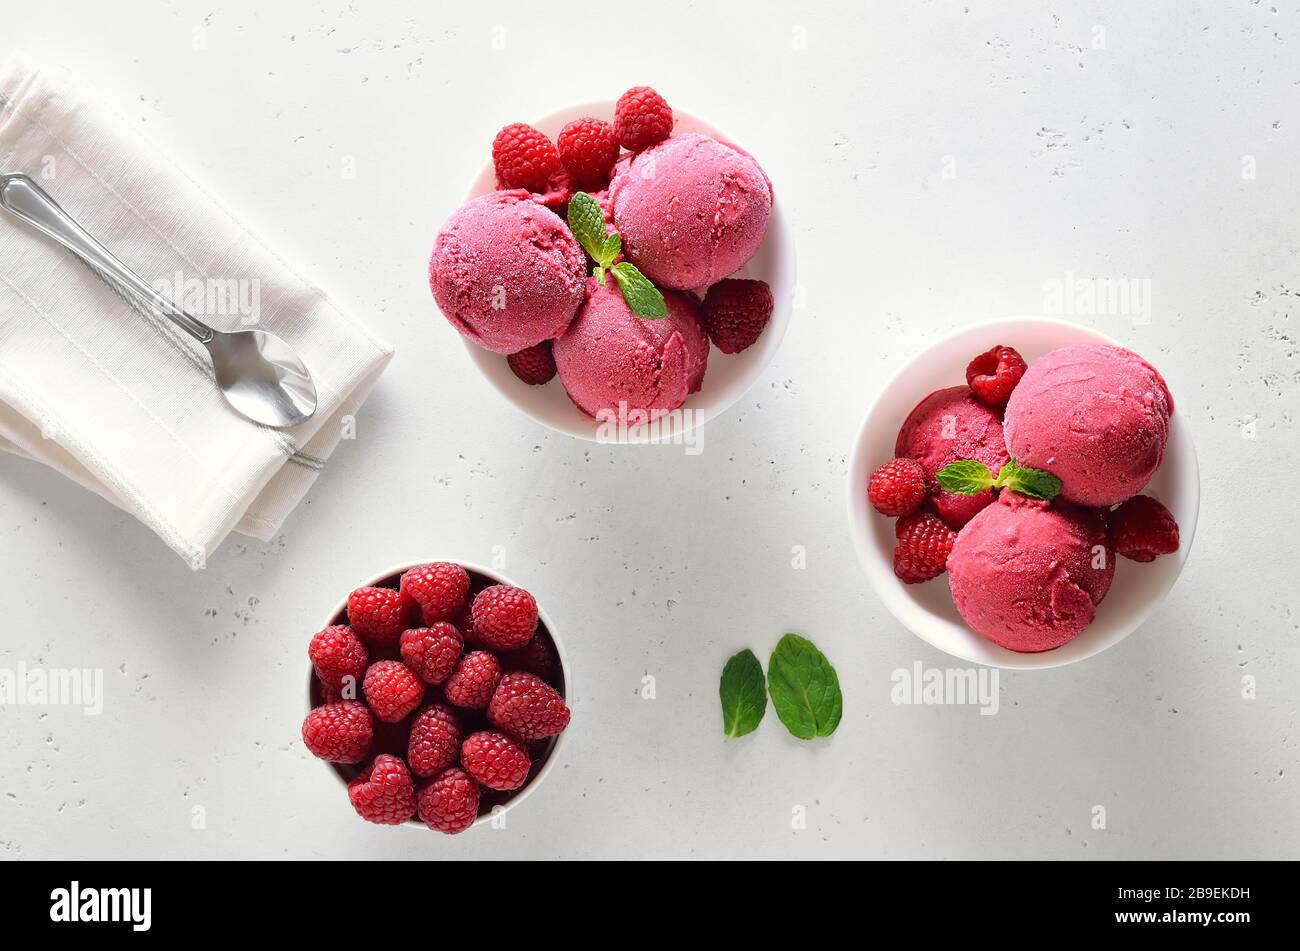 Raspberry ice cream scoop with fresh raspberries in bowl and fresh raspberries over white stone background with free text space. Top view, flat lay Stock Photo